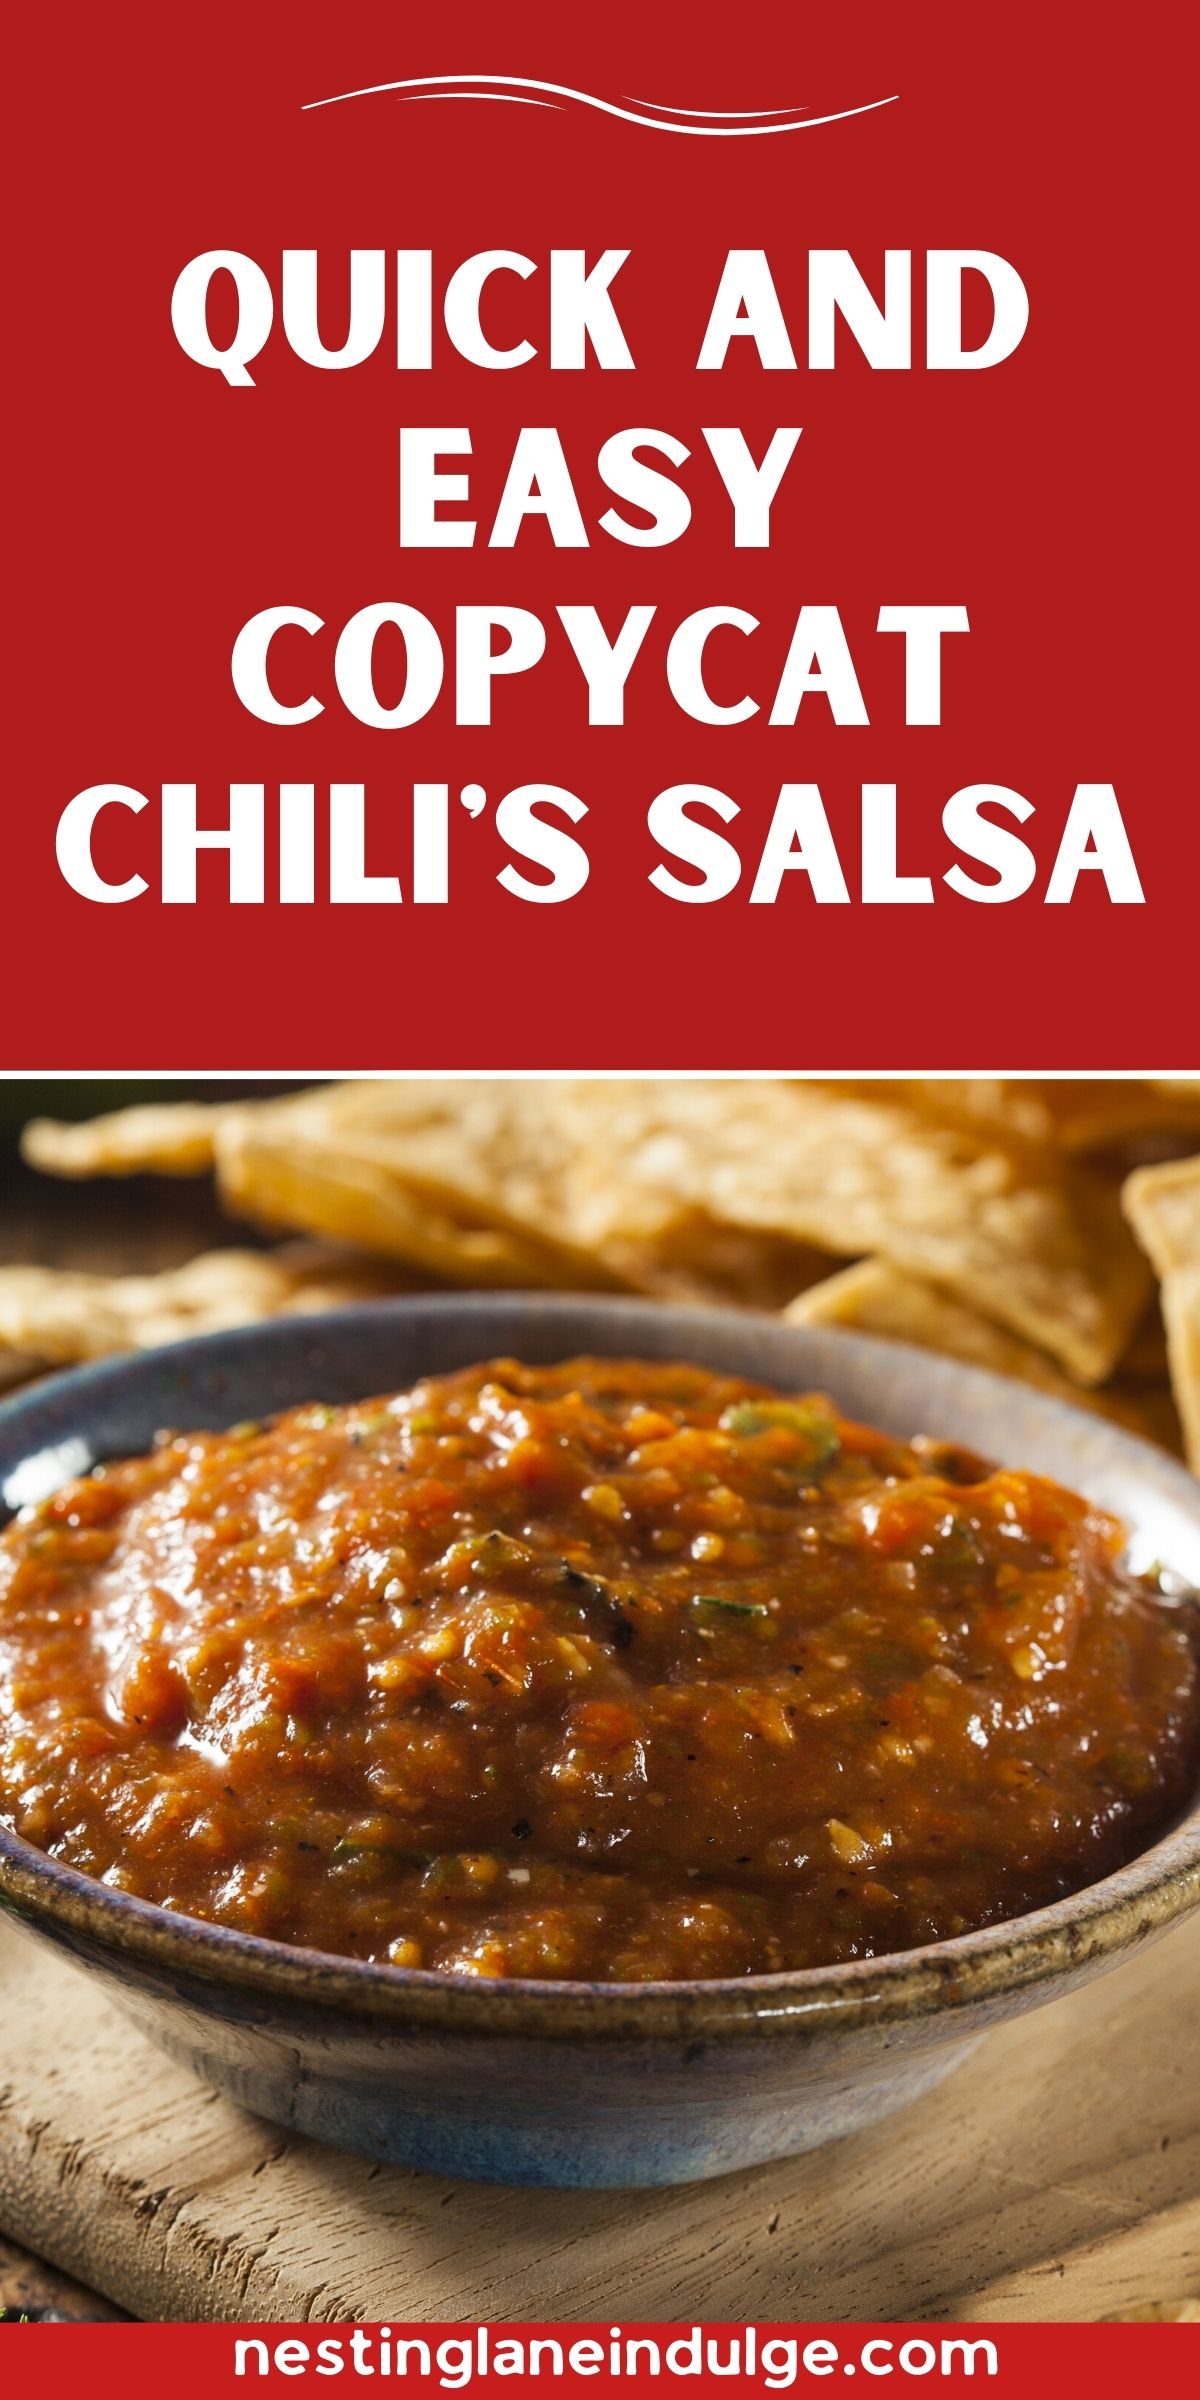 Graphic for Pinterest of Quick and Easy Copycat Chili's Salsa Recipe.